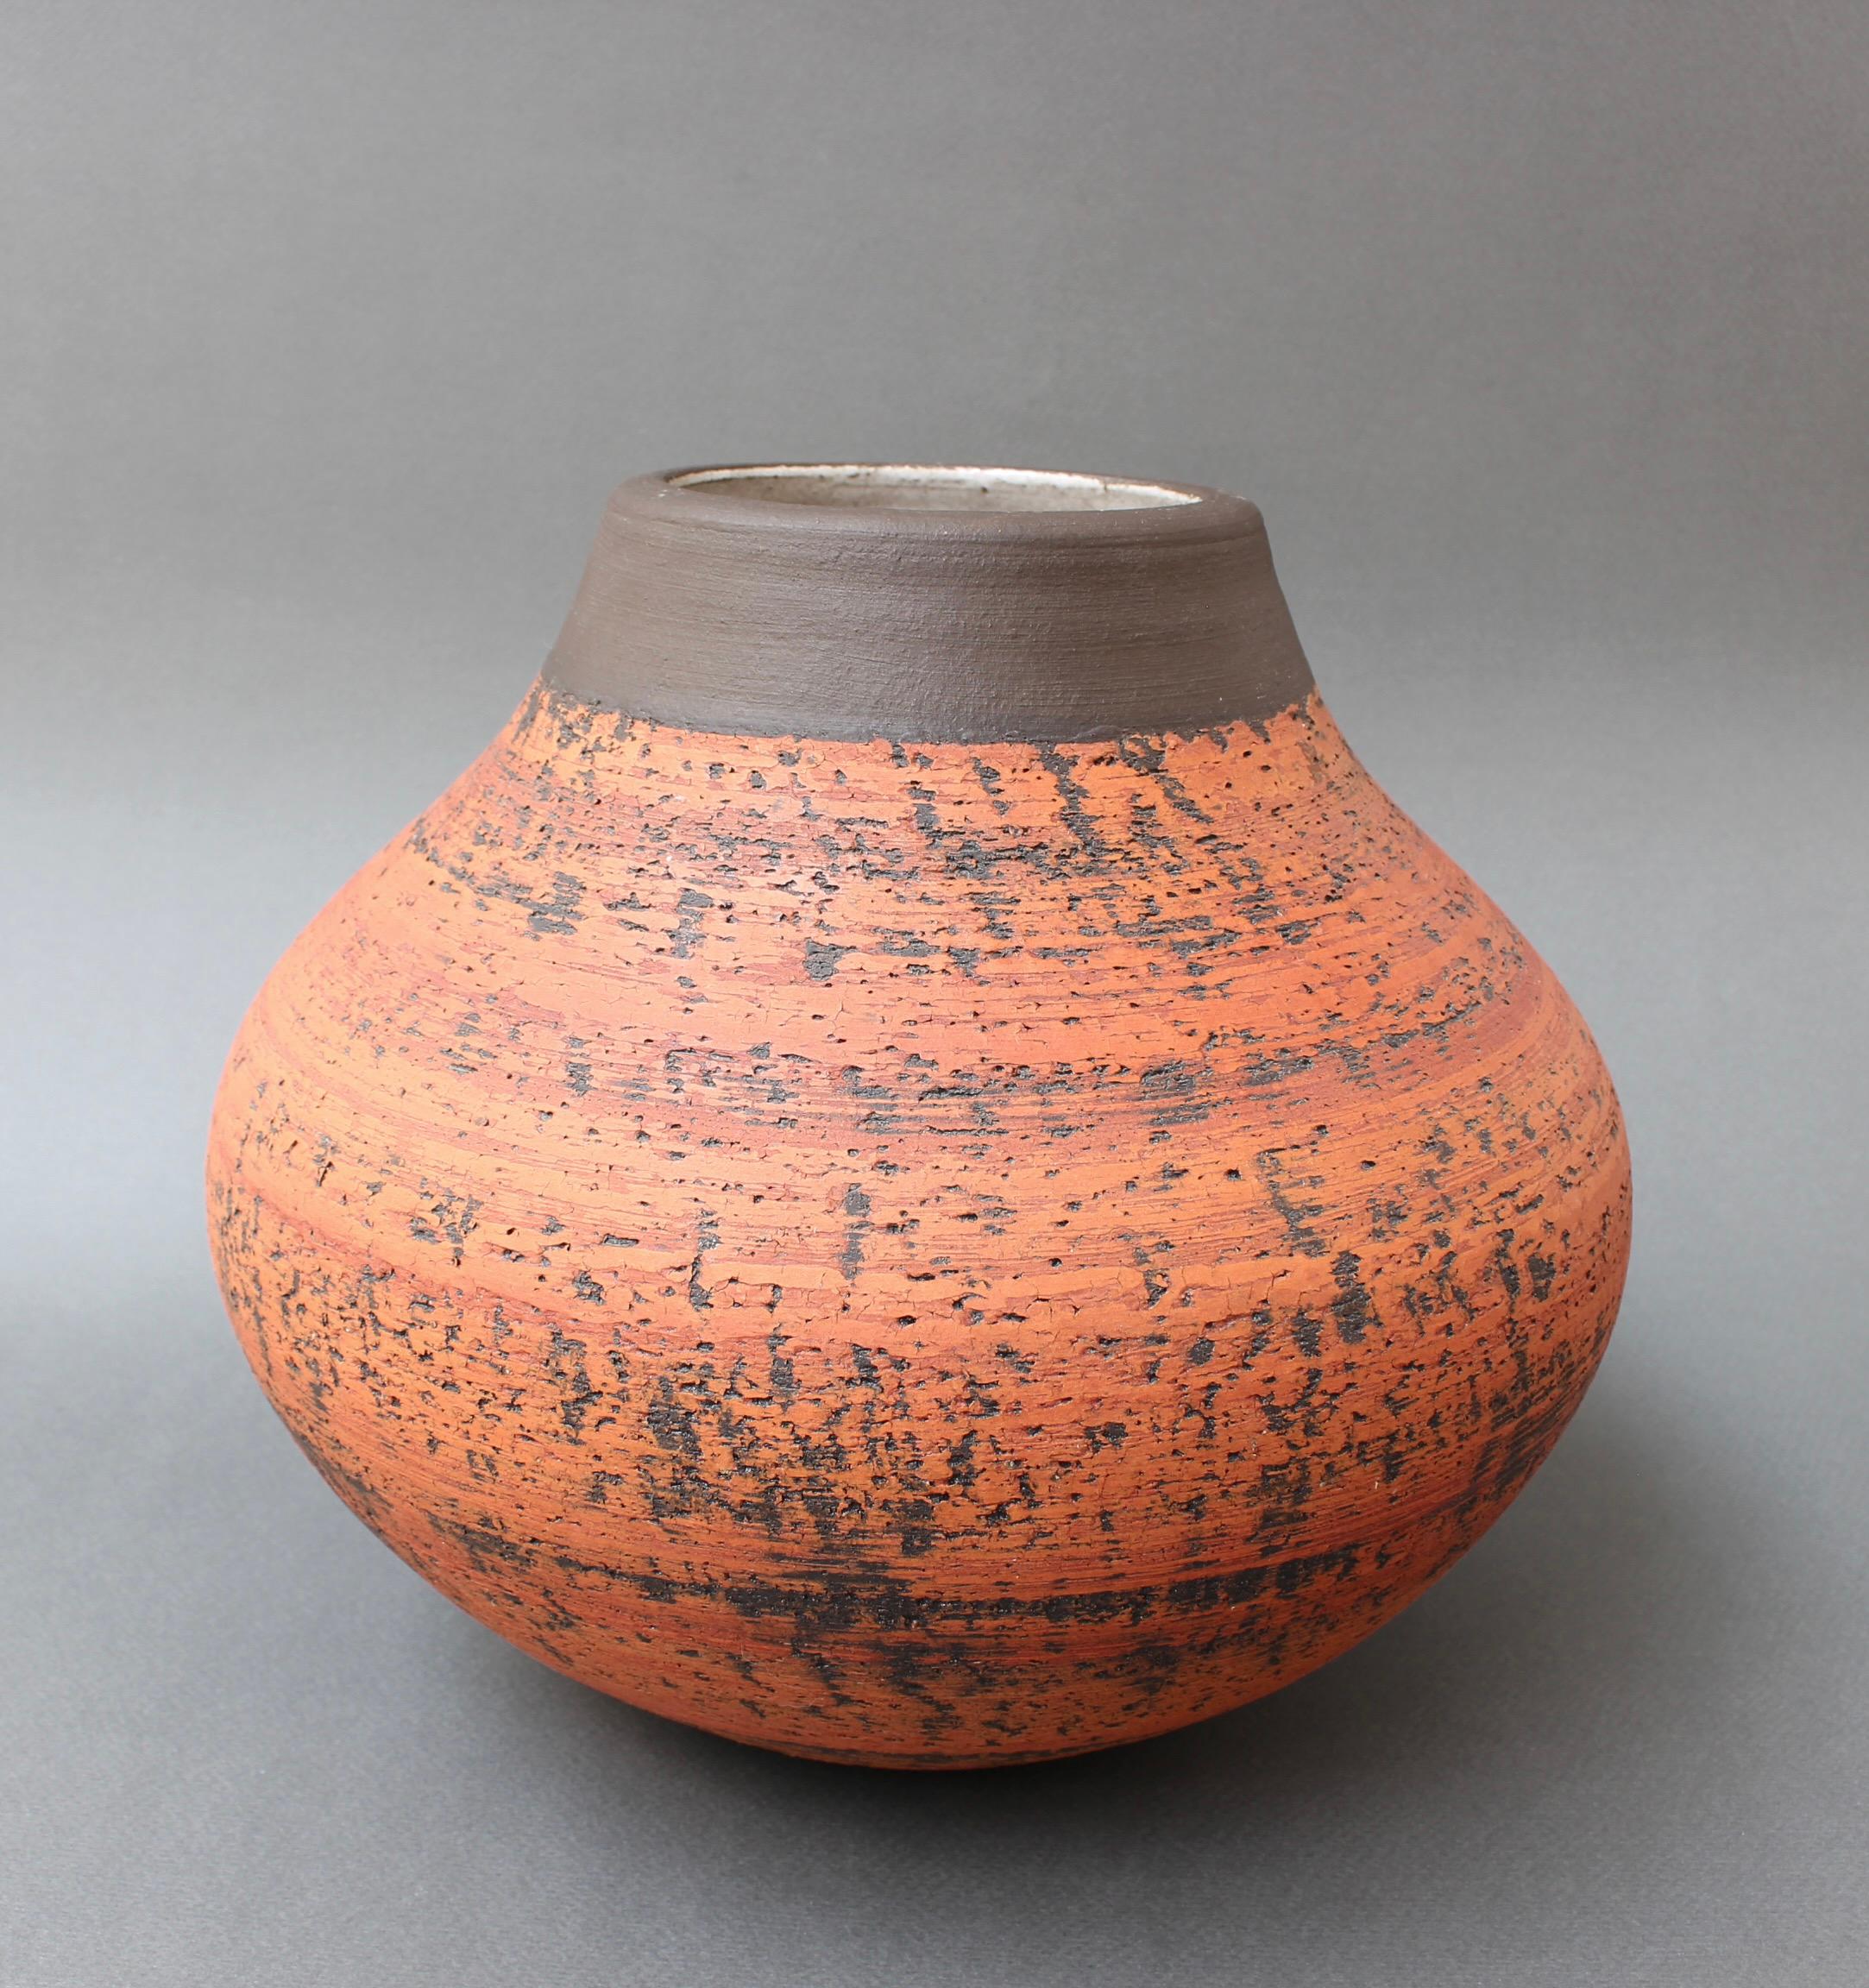 Vintage European earthenware vase (circa 1970s). A very rustic piece with a matt orange hue accented by incised brown markings encircling the body. The same colour encircles the neck and lip but provides tactile contrast with its even feel and more